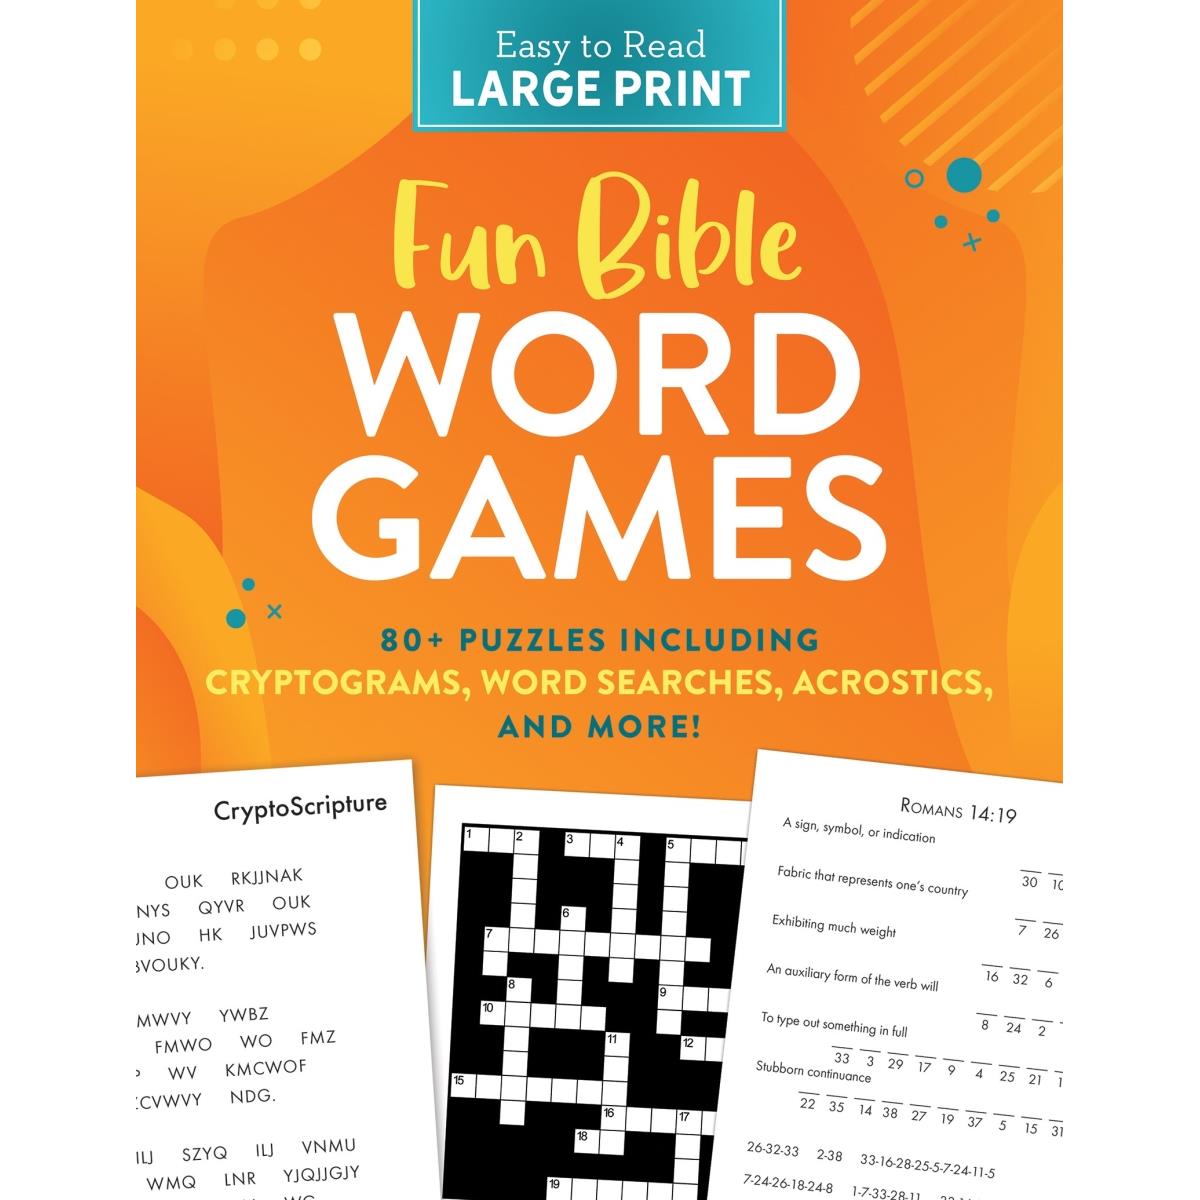 ISBN 9781636093468 product image for Barbour Publishing 221534 Fun Bible Word Games Large Print Book | upcitemdb.com